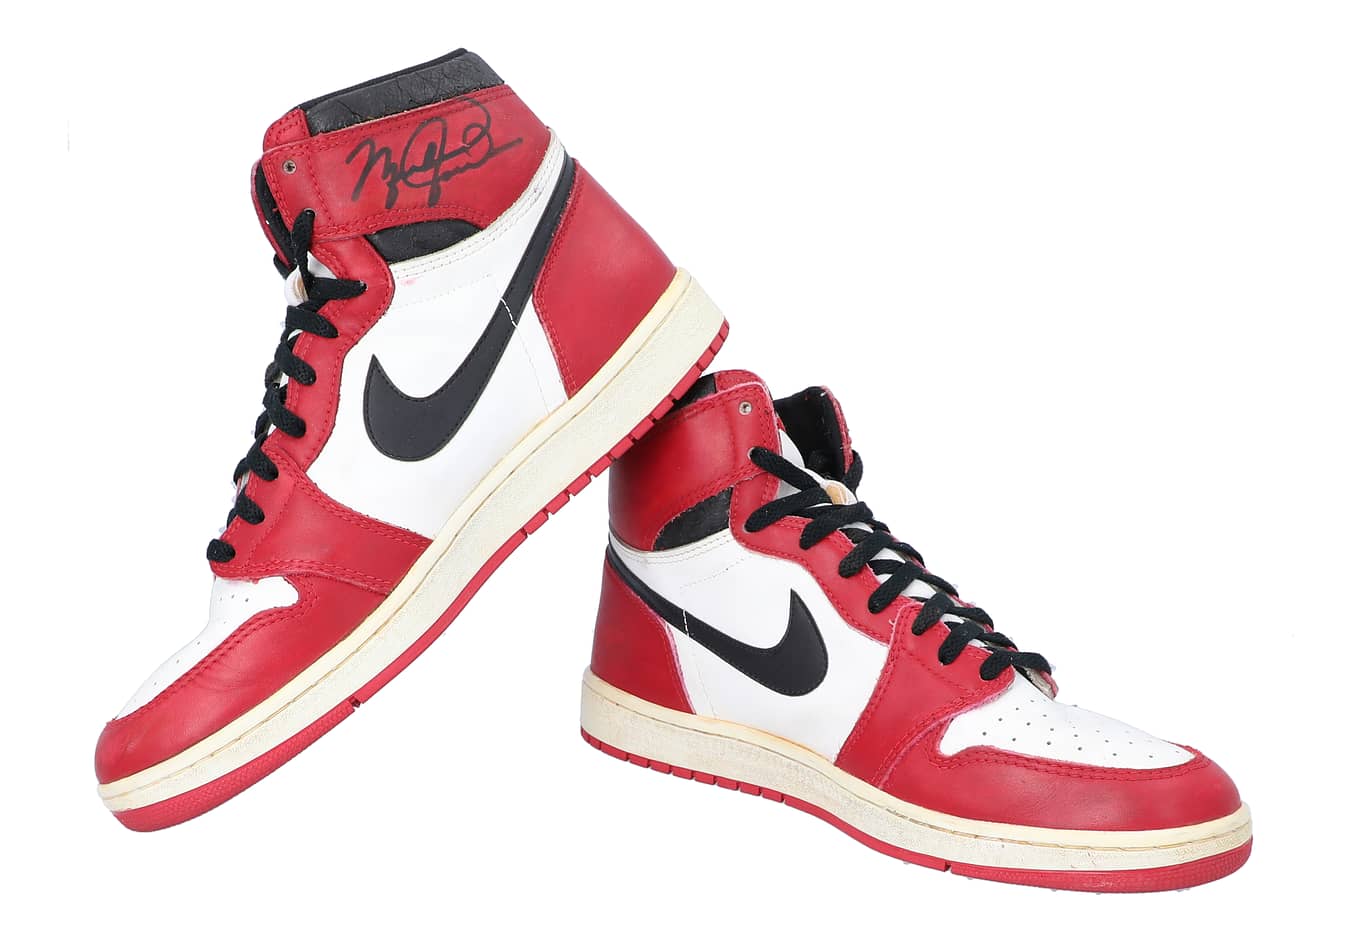 práctica Apéndice pulmón Goldin on Twitter: "ICONIC 🐐🏀👟 Last day to bid on these Michael Jordan  Signed 1985 Air Jordan 1 Chicago Sneakers in our April Elite Auction:  https://t.co/2th40H1tbl Extended bidding starts tonight at 9pm